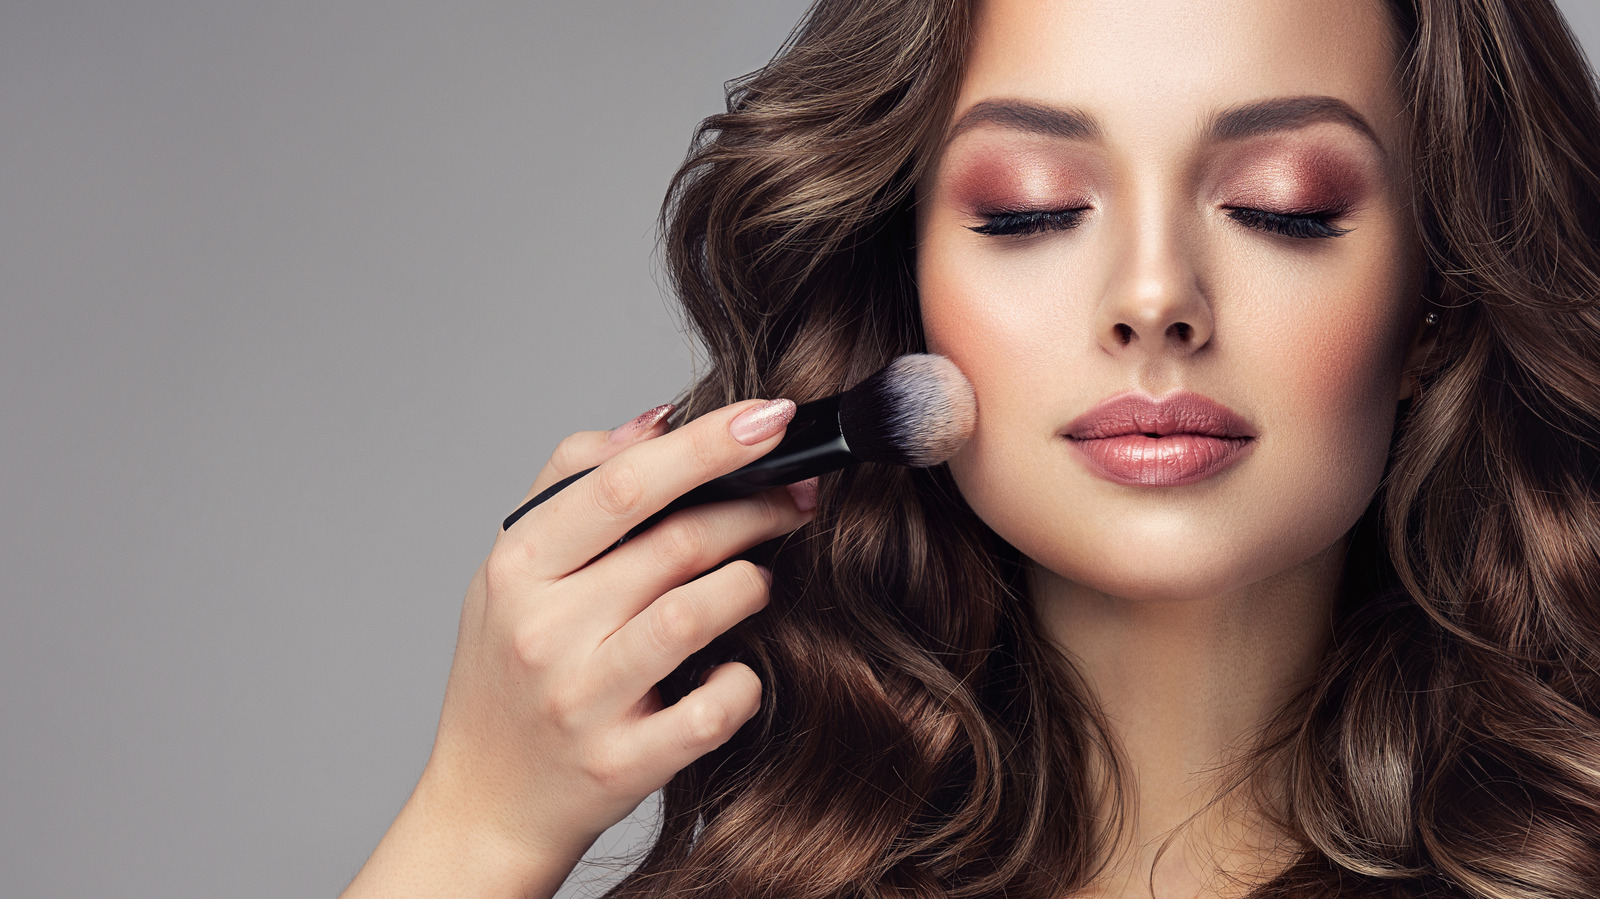 Are Sugar Cosmetics Products Worth It?